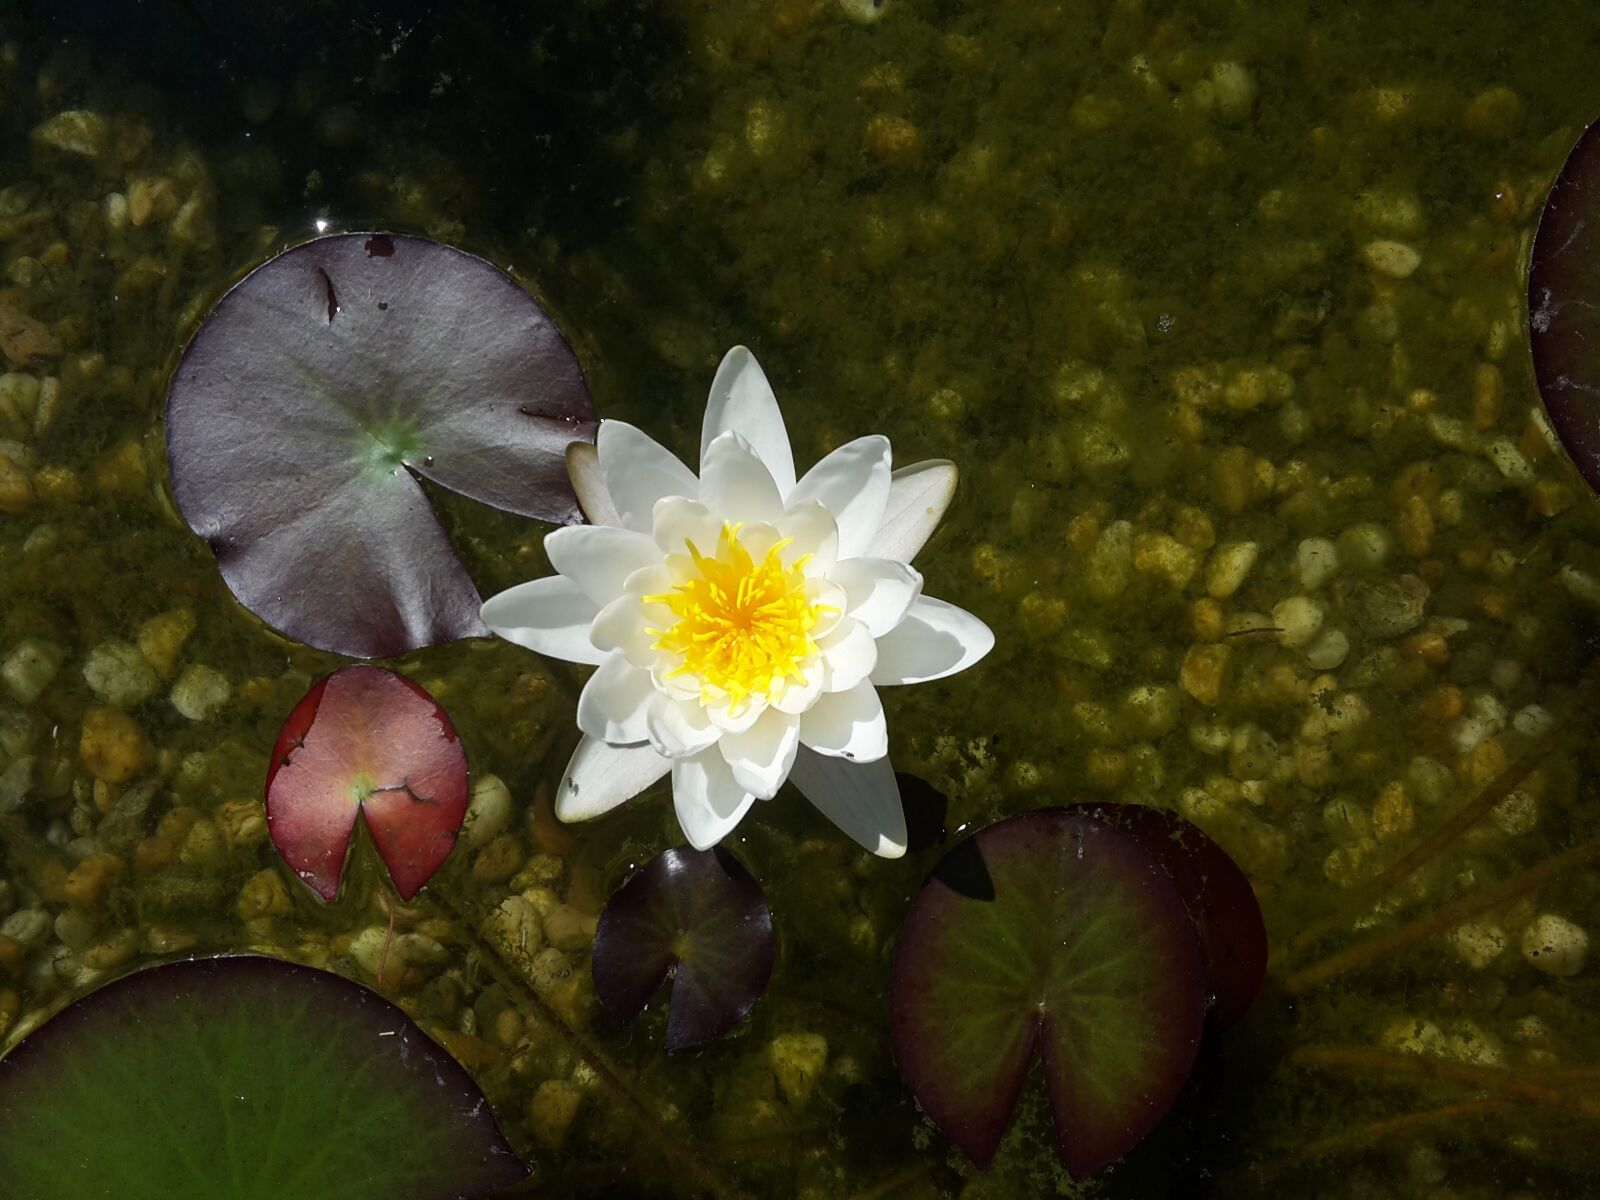 Samsung Galaxy S5 Mini sample photo. Pond, water lily, blossom photography